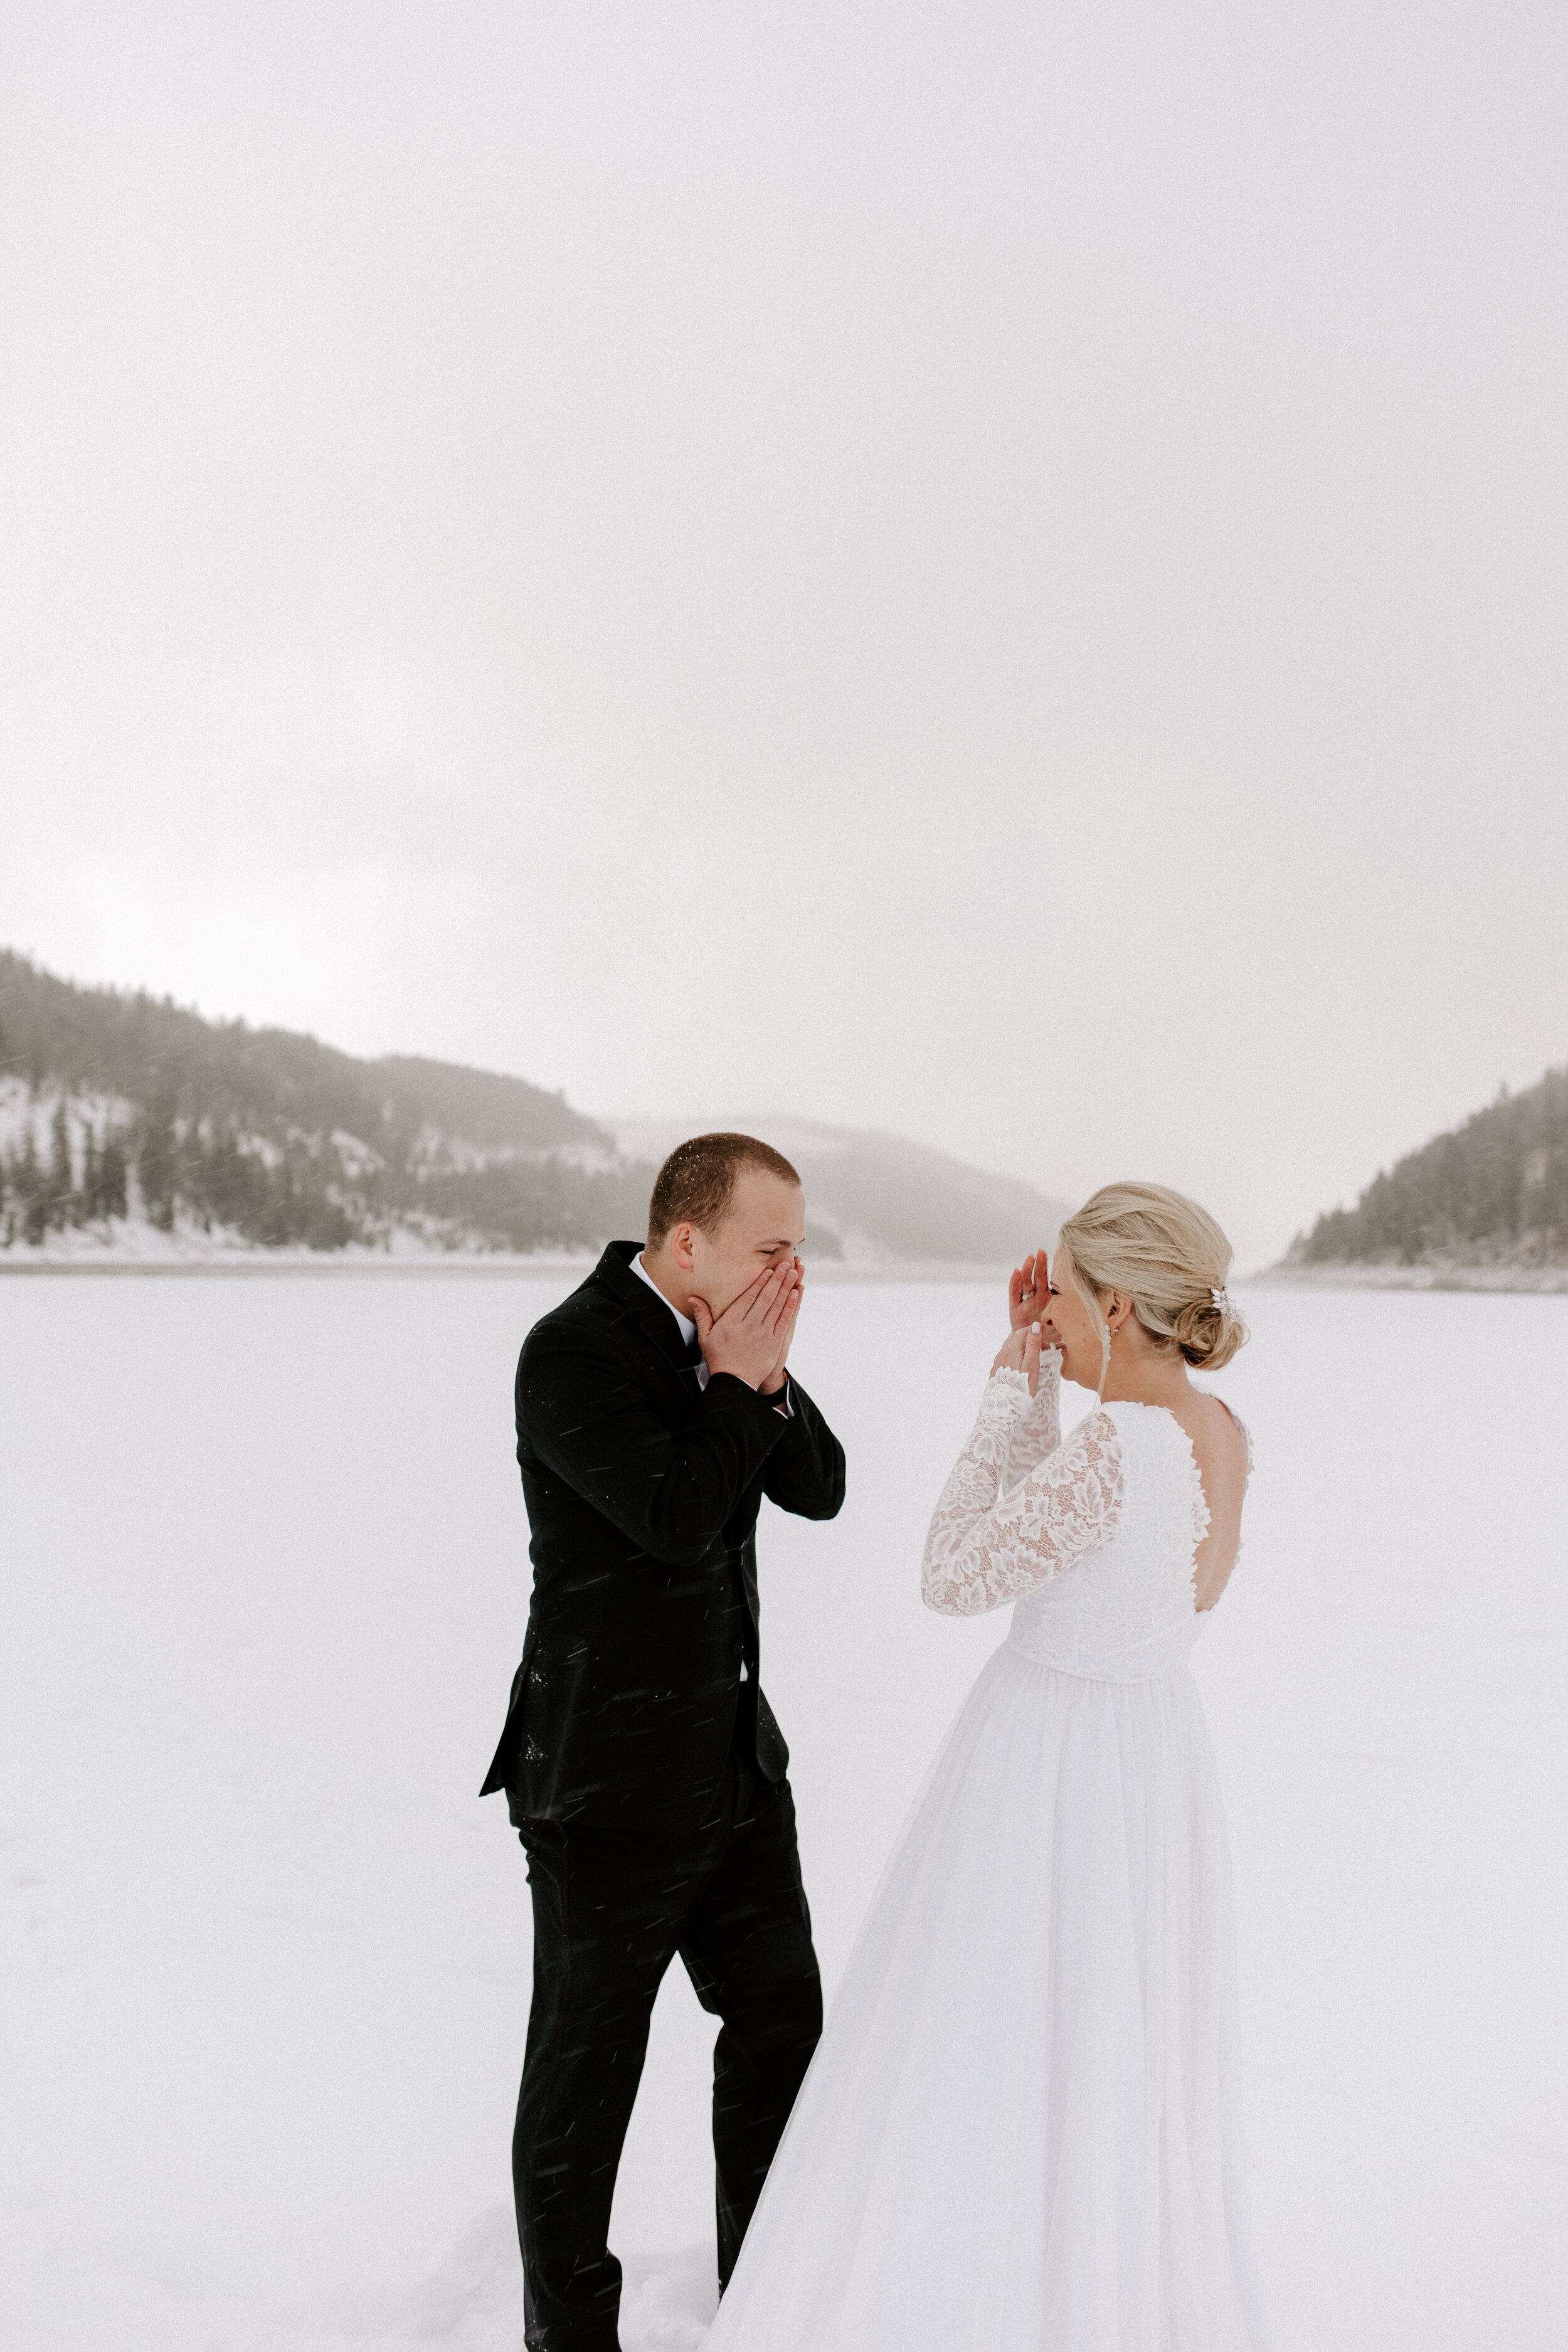 Winter Elopement at Sapphire Point in Breckenridge Dillon Colorado with wedding photographer Diana Coulter